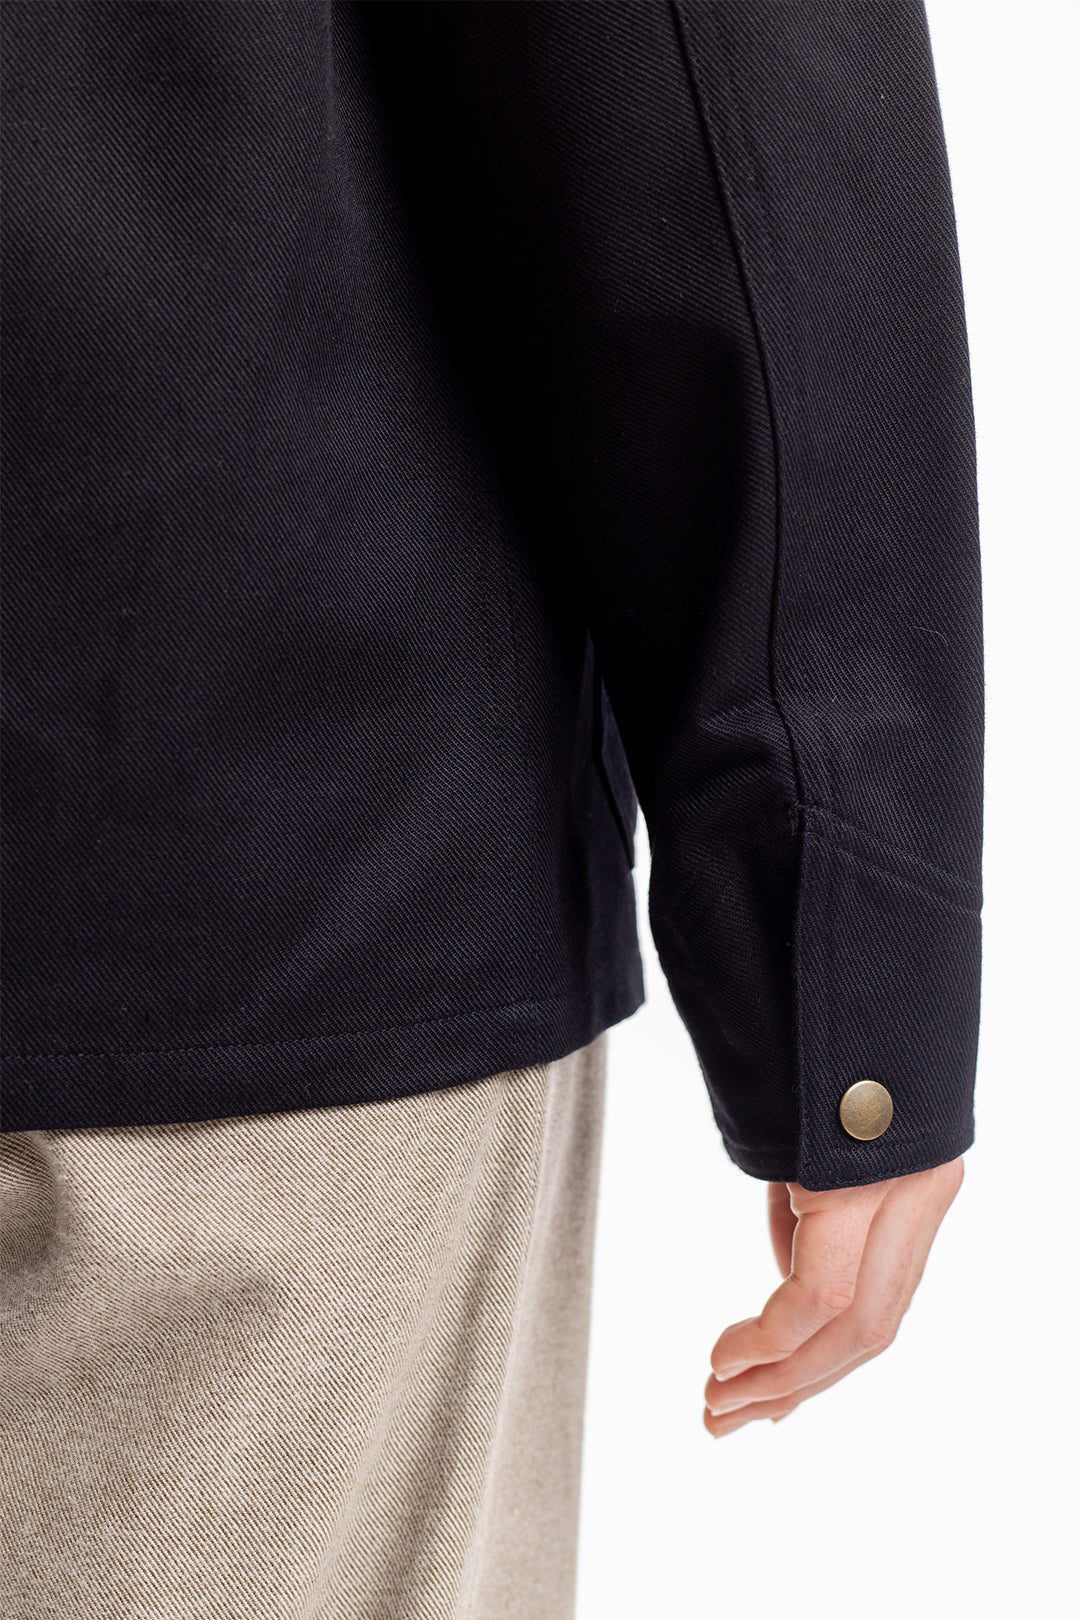 Black, lightweight jacket made from 100% organic cotton from Rotholz